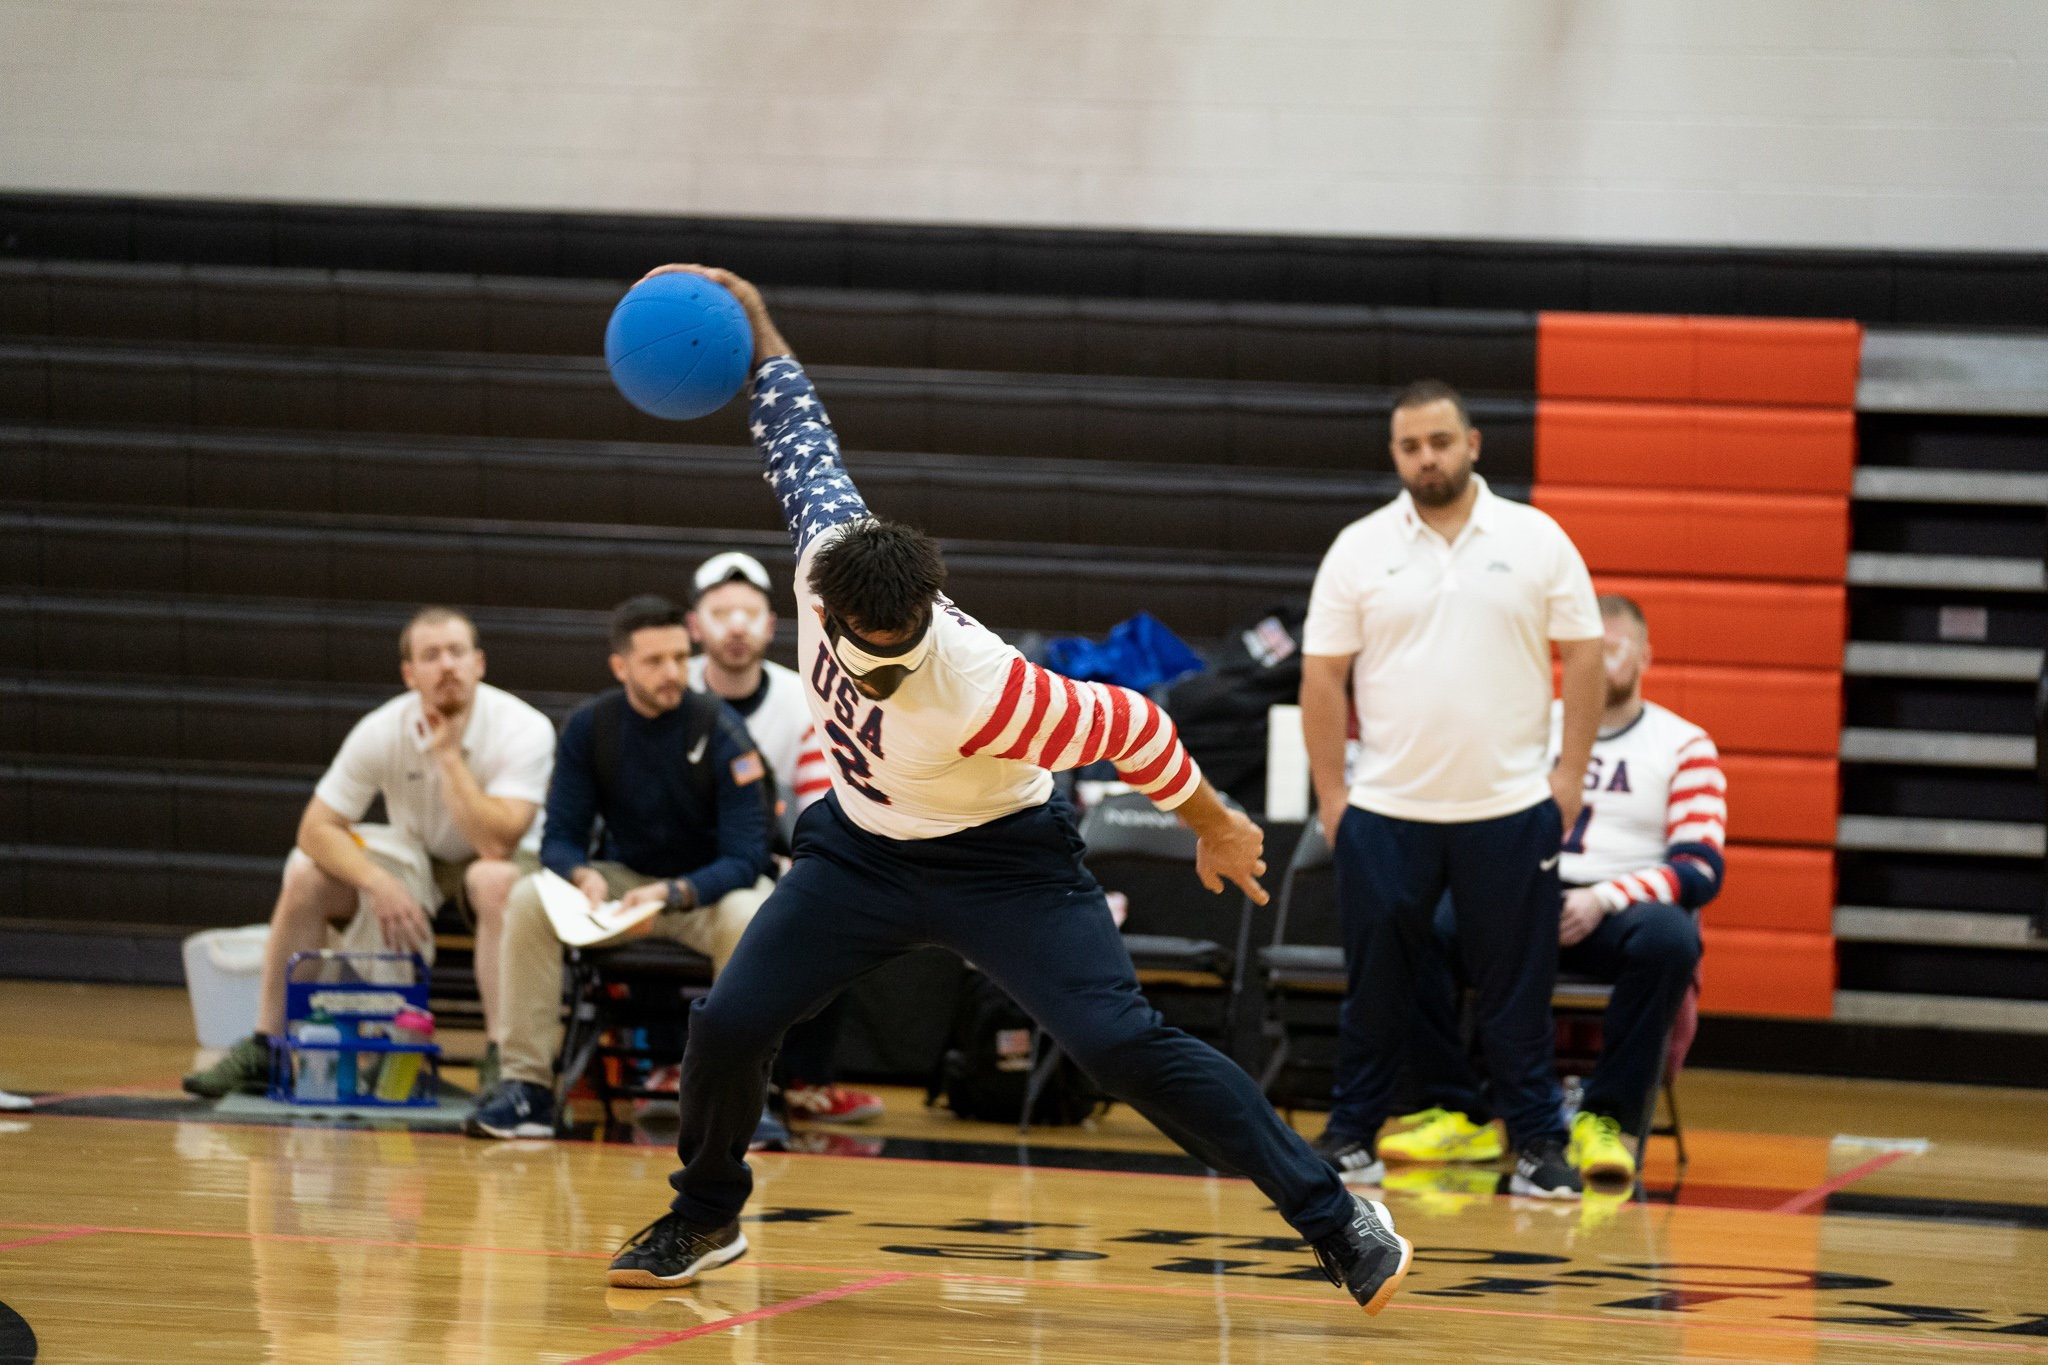 United States men bounce back with two wins at IBSA Goalball International Qualifier for Tokyo 2020